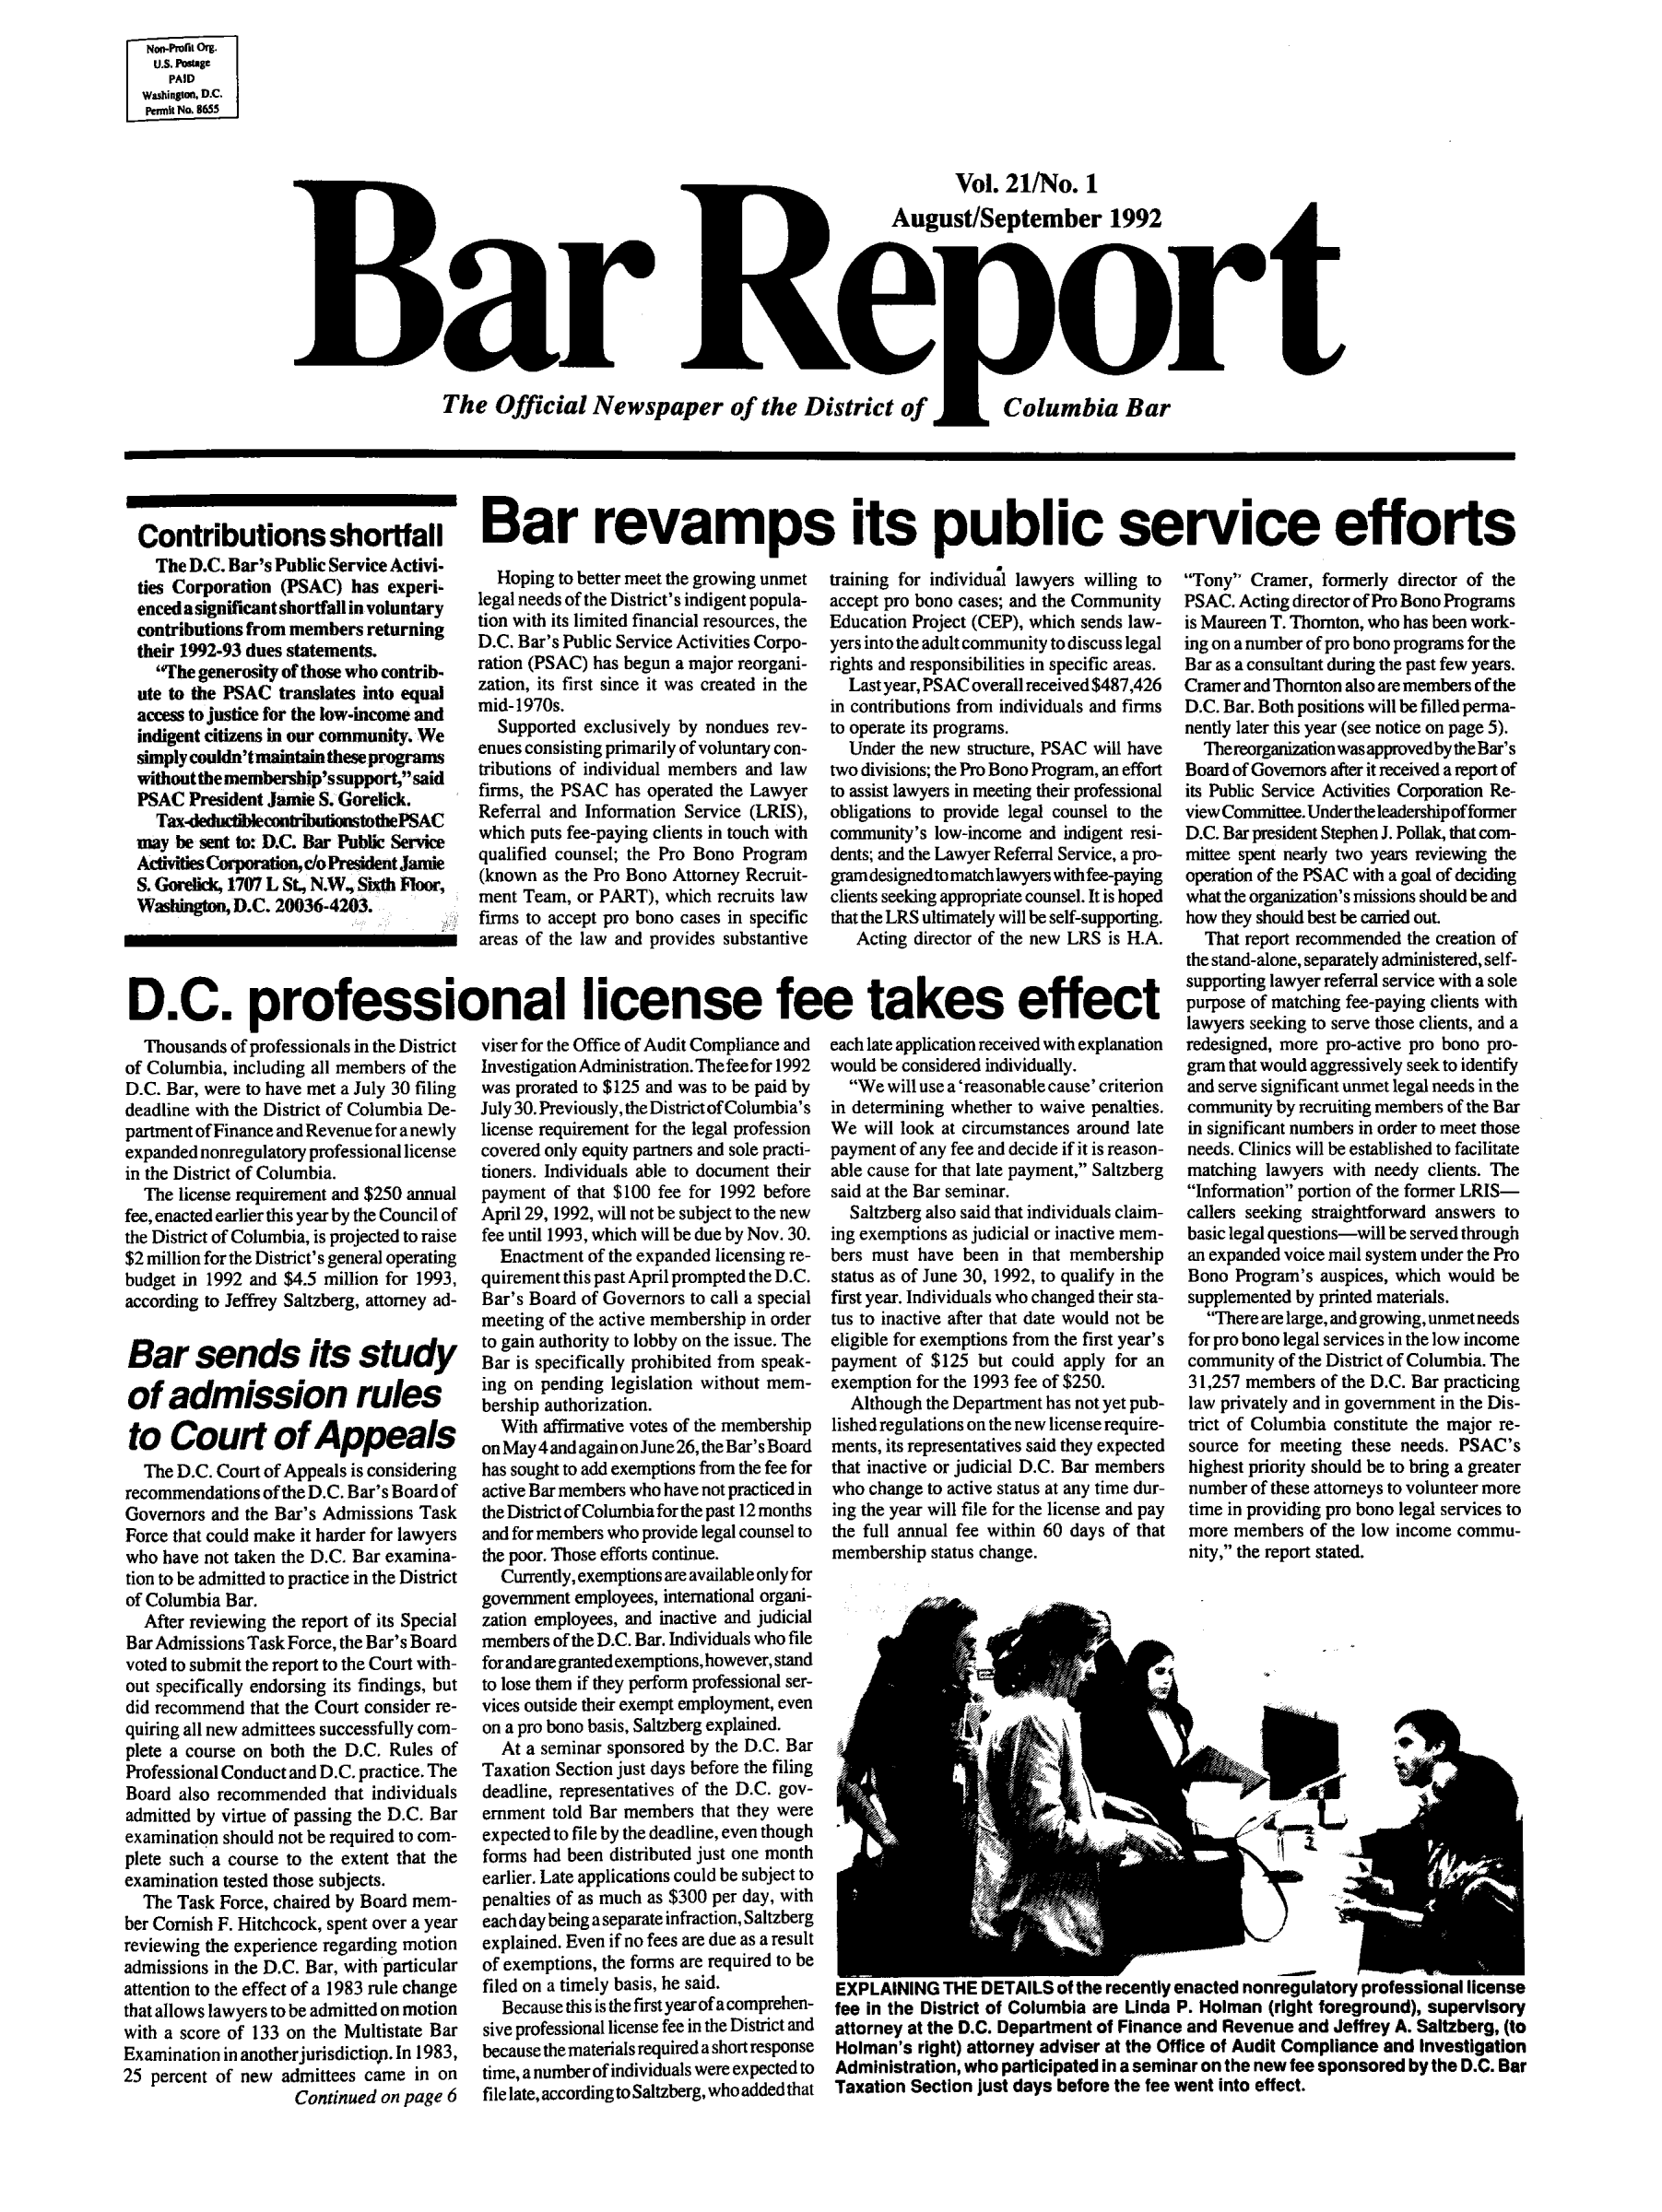 handle is hein.barjournals/breport0023 and id is 1 raw text is: Non-Prlk Org.
U.S.Postage
PAID
Washingto. D.C.
pemikNo 8655

Vol. 21/No. 1
August/September 1992
Barpreort
The Official Newspaper of the District of  Columbia Bar

Contributions shortfall
The D.C. Bar's Public Service Activi-
ties Corporation (PSAC) has experi-
encedasignificantshortfall involuntary
contributions from members returning
their 1992-93 dues statements.
The generosity of those who contrib-
ute to the PSAC translates into equal
access to justice for the low-income and
indigent citizens In our community. We
simply couldn'tmaintain theseprograms
without the membership'ssupport,said
PSAC President Jamie S. Gorelick.
Tax-deductiblecontributionstothePSAC
may be sent to: RDC. Bar Public Service
ActivitiesCorporation,cloPresidentJamie
S. Gorelick, 1707 L St., N.W, Sixth Floor,
Washington, D.C. 20036-4203.
D.C. professic
Thousands of professionals in the District
of Columbia, including all members of the
D.C. Bar, were to have met a July 30 filing
deadline with the District of Columbia De-
partment of Finance and Revenue for a newly
expanded nonregulatory professional license
in the District of Columbia.
The license requirement and $250 annual
fee, enacted earlier this year by the Council of
the District of Columbia, is projected to raise
$2 million for the District's general operating
budget in 1992 and $4.5 million for 1993,
according to Jeffrey Saltzberg, attorney ad-
Bar sends its study
of admission rules
to Court of Appeals
The D.C. Court of Appeals is considering
recommendations of the D.C. Bar's Board of
Governors and the Bar's Admissions Task
Force that could make it harder for lawyers
who have not taken the D.C. Bar examina-
tion to be admitted to practice in the District
of Columbia Bar.
After reviewing the report of its Special
Bar Admissions Task Force, the Bar's Board
voted to submit the report to the Court with-
out specifically endorsing its findings, but
did recommend that the Court consider re-
quiring all new admittees successfully com-
plete a course on both the D.C. Rules of
Professional Conduct and D.C. practice. The
Board also recommended that individuals
admitted by virtue of passing the D.C. Bar
examination should not be required to com-
plete such a course to the extent that the
examination tested those subjects.
The Task Force, chaired by Board mem-
ber Cornish F. Hitchcock, spent over a year
reviewing the experience regarding motion
admissions in the D.C. Bar, with particular
attention to the effect of a 1983 rule change
that allows lawyers to be admitted on motion
with a score of 133 on the Multistate Bar
Examination in another jurisdictiop. In 1983,
25 percent of new admittees came in on
Continued on page 6

Bar revamps its public service efforts

Hoping to better meet the growing unmet
legal needs of the District's indigent popula-
tion with its limited financial resources, the
D.C. Bar's Public Service Activities Corpo-
ration (PSAC) has begun a major reorgani-
zation, its first since it was created in the
mid-1970s.
Supported exclusively by nondues rev-
enues consisting primarily of voluntary con-
tributions of individual members and law
firms, the PSAC has operated the Lawyer
Referral and Information Service (LRIS),
which puts fee-paying clients in touch with
qualified counsel; the Pro Bono Program
(known as the Pro Bono Attorney Recruit-
ment Team, or PART), which recruits law
firms to accept pro bono cases in specific
areas of the law and provides substantive
onal license fe
viser for the Office of Audit Compliance and
Investigation Administration. The fee for 1992
was prorated to $125 and was to be paid by
July 30. Previously, theDistrictof Columbia's
license requirement for the legal profession
covered only equity partners and sole practi-
tioners. Individuals able to document their
payment of that $100 fee for 1992 before
April 29, 1992, will not be subject to the new
fee until 1993, which will be due by Nov. 30.
Enactment of the expanded licensing re-
quirement this past April prompted the D.C.
Bar's Board of Governors to call a special
meeting of the active membership in order
to gain authority to lobby on the issue. The
Bar is specifically prohibited from speak-
ing on pending legislation without mem-
bership authorization.
With affirmative votes of the membership
on May4andagainon June26, theBar's Board
has sought to add exemptions from the fee for
active Bar members who have not practiced in
the District of Columbia for the past 12 months
and for members who provide legal counsel to
the poor. Those efforts continue.
Currently, exemptions are available only for
government employees, international organi-
zation employees, and inactive and judicial
members of the D.C. Bar. Individuals who file
forandare grantedexemptions,however,stand
to lose them if they perform professional ser-
vices outside their exempt employment, even
on a pro bono basis, Saltzberg explained.
At a seminar sponsored by the D.C. Bar
Taxation Section just days before the filing
deadline, representatives of the D.C. gov-
emnment told Bar members that they were
expected to file by the deadline, even though
forms had been distributed just one month
earlier. Late applications could be subject to
penalties of as much as $300 per day, with
each day being aseparate infraction, Saltzberg
explained. Even if no fees are due as a result
of exemptions, the forms are required to be
filed on a timely basis, he said.
Because this is the first year ofa comnprehen-
sive professional license fee in the District and
because the materials required a short response
time, a number of individuals were expected to
file late, according to Saltzberg, who added that

training for individual lawyers willing to
accept pro bono cases; and the Community
Education Project (CEP), which sends law-
yers into the adult community to discuss legal
rights and responsibilities in specific areas.
Lastyear,PSACoverallreceived$487,426
in contributions from individuals and firms
to operate its programs.
Under the new structure, PSAC will have
two divisions; the Pro Bono Program, an effort
to assist lawyers in meeting their professional
obligations to provide legal counsel to the
community's low-income and indigent resi-
dents; and the Lawyer Referral Service, a pro-
gramdesignedtomatchlawyers withfee-paying
clients seeking appropriate counsel. It is hoped
that the LRS ultimately will be self-supporting.
Acting director of the new LRS is H.A.
e takes effect
each late application received with explanation
would be considered individually.
We will use a 'reasonable cause' criterion
in determining whether to waive penalties.
We will look at circumstances around late
payment of any fee and decide if it is reason-
able cause for that late payment, Saltzberg
said at the Bar seminar.
Saltzberg also said that individuals claim-
ing exemptions as judicial or inactive mem-
bers must have been in that membership
status as of June 30, 1992, to qualify in the
first year. Individuals who changed their sta-
tus to inactive after that date would not be
eligible for exemptions from the first year's
payment of $125 but could apply for an
exemption for the 1993 fee of $250.
Although the Department has not yet pub-
lished regulations on the new license require-
ments, its representatives said they expected
that inactive or judicial D.C. Bar members
who change to active status at any time dur
ing the year will file for the license and pay
the full annual fee within 60 days of that
membership status change.

Tony Cramer, formerly director of the
PSAC. Acting director of Pro Bono Programs
is Maureen T. Thornton, who has been work-
ing on a number of pro bono programs for the
Bar as a consultant during the past few years.
Cramer and Thornton also are members of the
D.C. Bar. Both positions will be filled perma-
nently later this year (see notice on page 5).
ThereorganizationwasapprovedbytheBar's
Board of Governors after it received a report of
its Public Service Activities Corporation Re-
view Committee.Under the leadership offormer
D.C. Barpresident Stephen J. Pollak, that com-
mittee spent nearly two years reviewing the
operation of the PSAC with a goal of deciding
what the organization's missions should be and
how they should best be carried out.
That report recommended the creation of
the stand-alone, separately administered, self-
supporting lawyer referral service with a sole
purpose of matching fee-paying clients with
lawyers seeking to serve those clients, and a
redesigned, more pro-active pro bono pro-
gram that would aggressively seek to identify
and serve significant unmet legal needs in the
community by recruiting members of the Bar
in significant numbers in order to meet those
needs. Clinics will be established to facilitate
matching lawyers with needy clients. The
Information portion of the former LRIS-
callers seeking straightforward answers to
basic legal questions-will be served through
an expanded voice mail system under the Pro
Bono Program's auspices, which would be
supplemented by printed materials.
There are large, and growing, unmet needs
for pro bono legal services in the low income
community of the District of Columbia. The
31,257 members of the D.C. Bar practicing
law privately and in government in the Dis-
trict of Columbia constitute the major re-
source for meeting these needs. PSAC's
highest priority should be to bring a greater
number of these attorneys to volunteer more
time in providing pro bono legal services to
more members of the low income commu-
nity, the report stated.

EXPLAINING THE DETAILS of the recently enacted nonregulatory professional license
fee in the District of Columbia are Linda P. Holman (right foreground), supervisory
attorney at the D.C. Department of Finance and Revenue and Jeffrey A. Saltzberg, (to
Holman's right) attorney adviser at the Office of Audit Compliance and Investigation
Administration, who participated in a seminar on the new fee sponsored by the D.C. Bar
Taxation Section just days before the fee went into effect.


